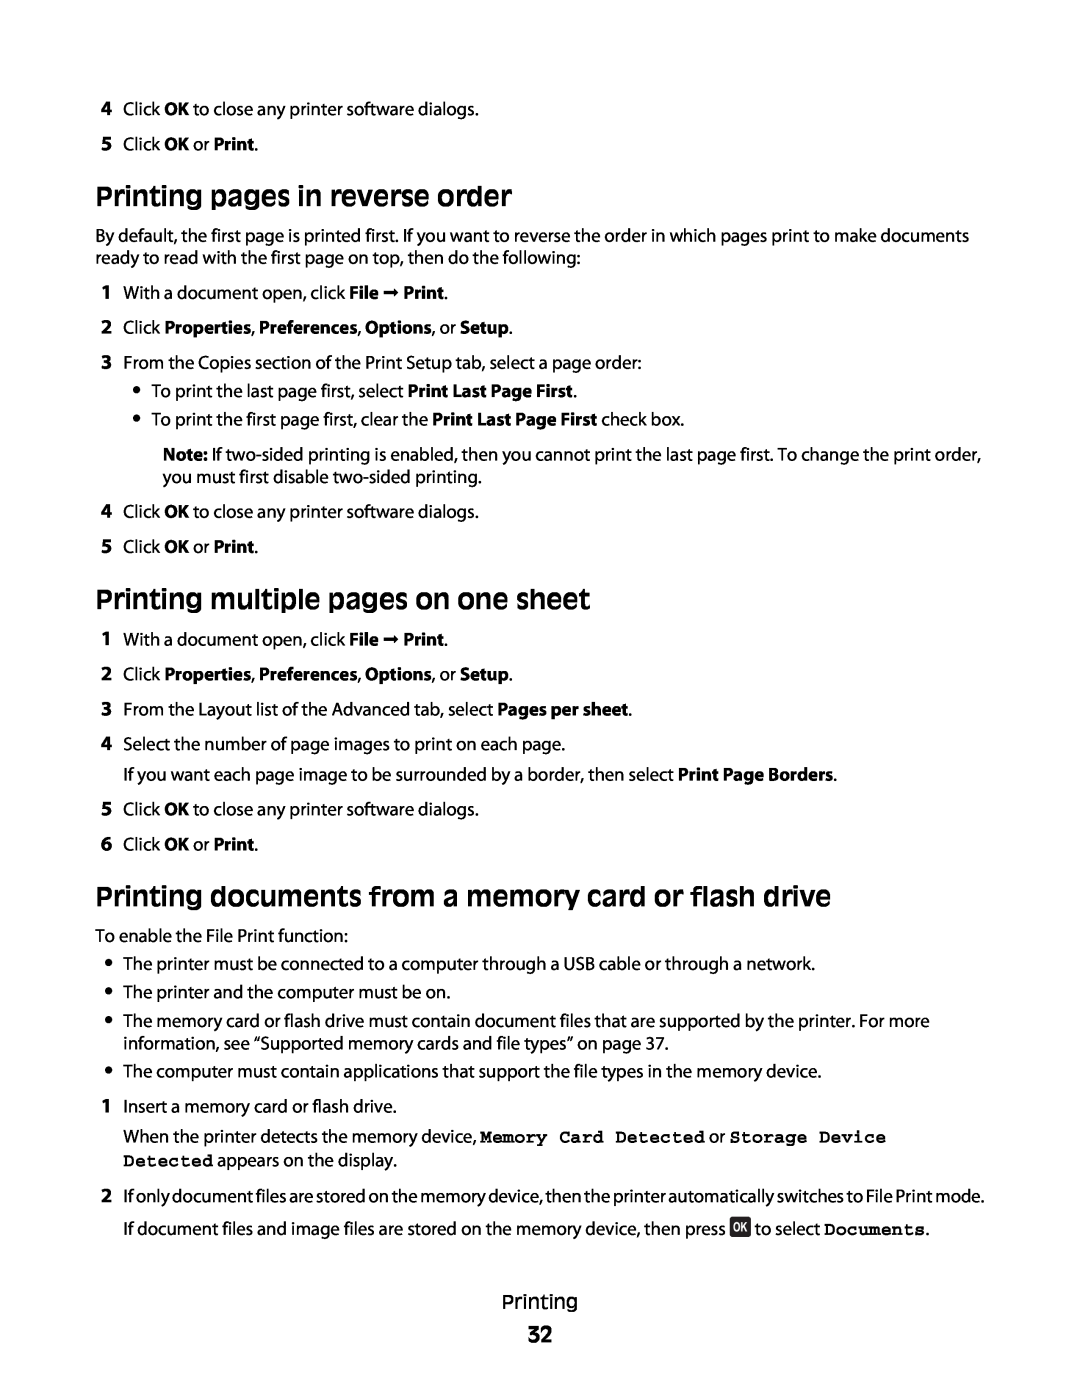 Dell V515W manual Printing pages in reverse order, Printing multiple pages on one sheet 